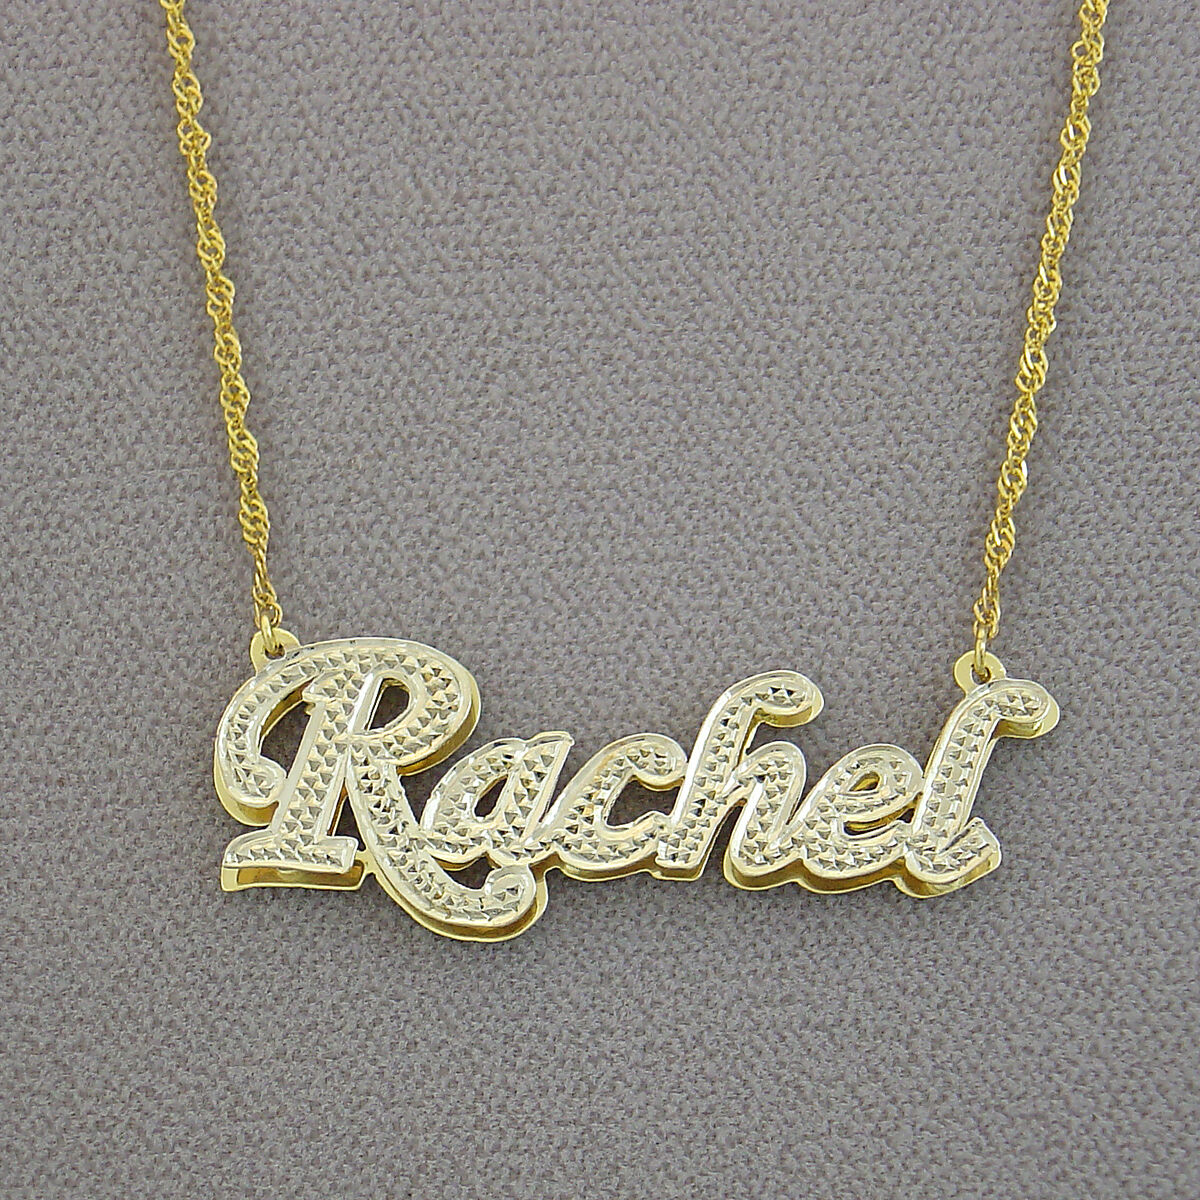 Personalized Jewelry Double Plate Name Pendant Small Size ND02X